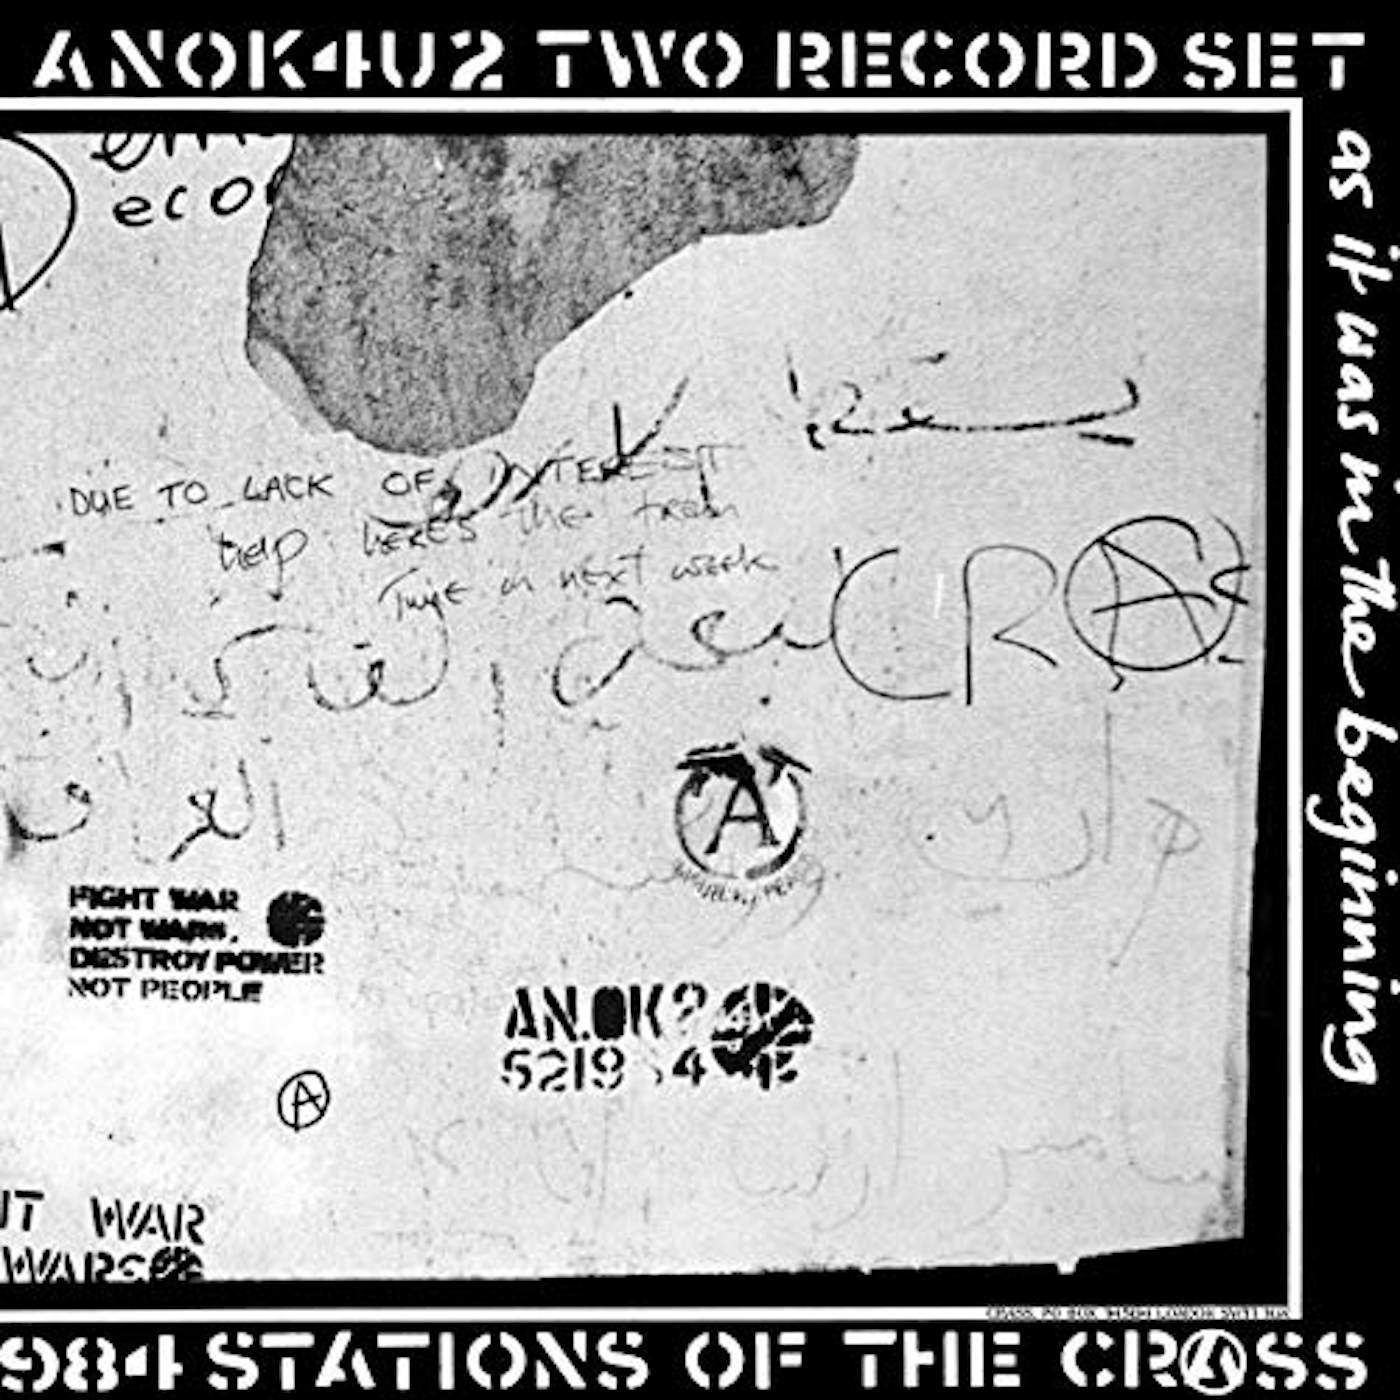 STATIONS OF THE CRASS CD